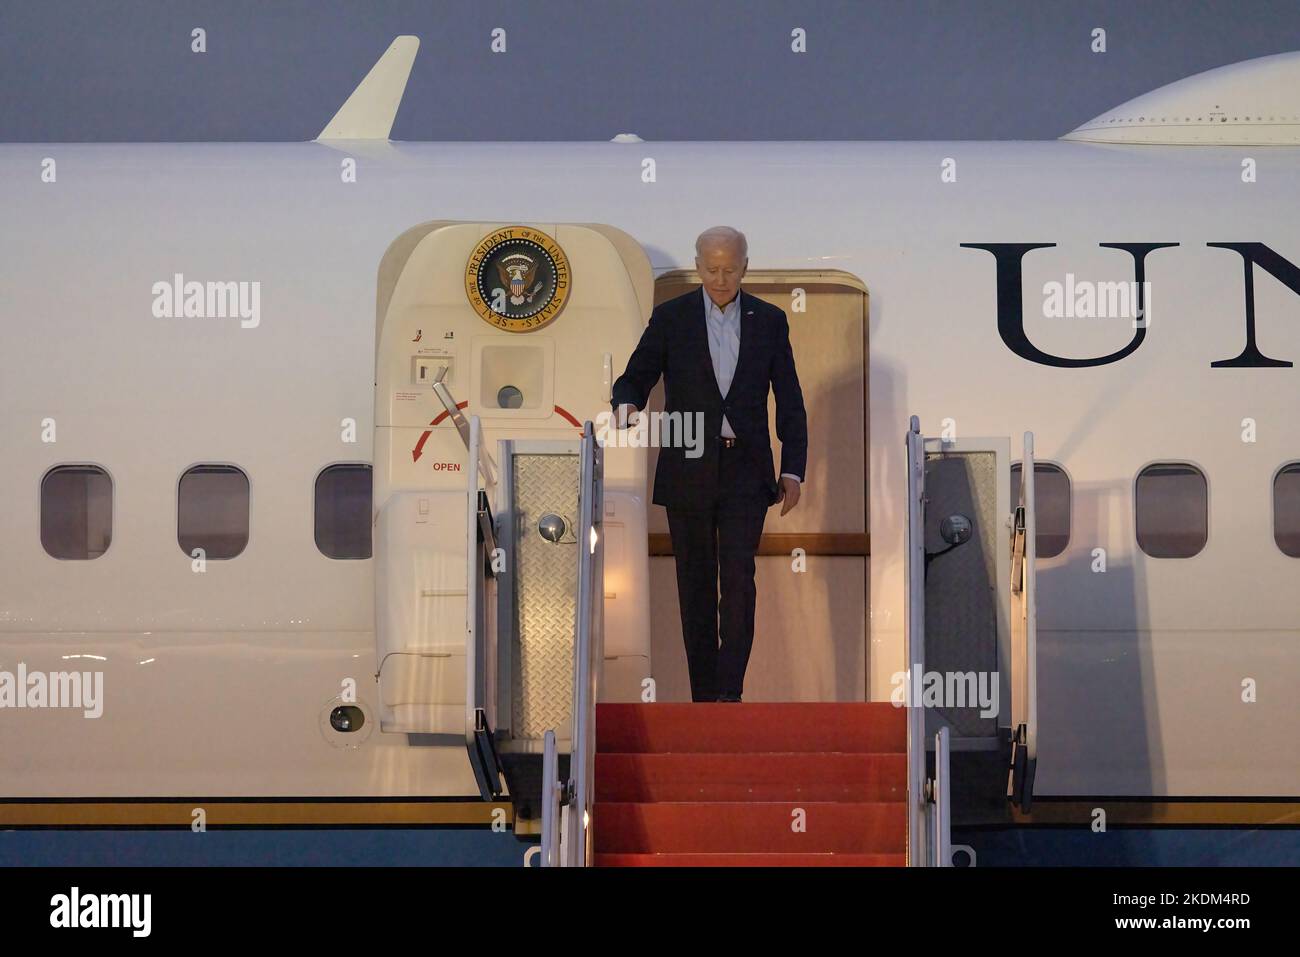 HARRISON, N.Y. — November 6, 2022: President Joe Biden arrives at Westchester County Airport on Air Force One. Stock Photo